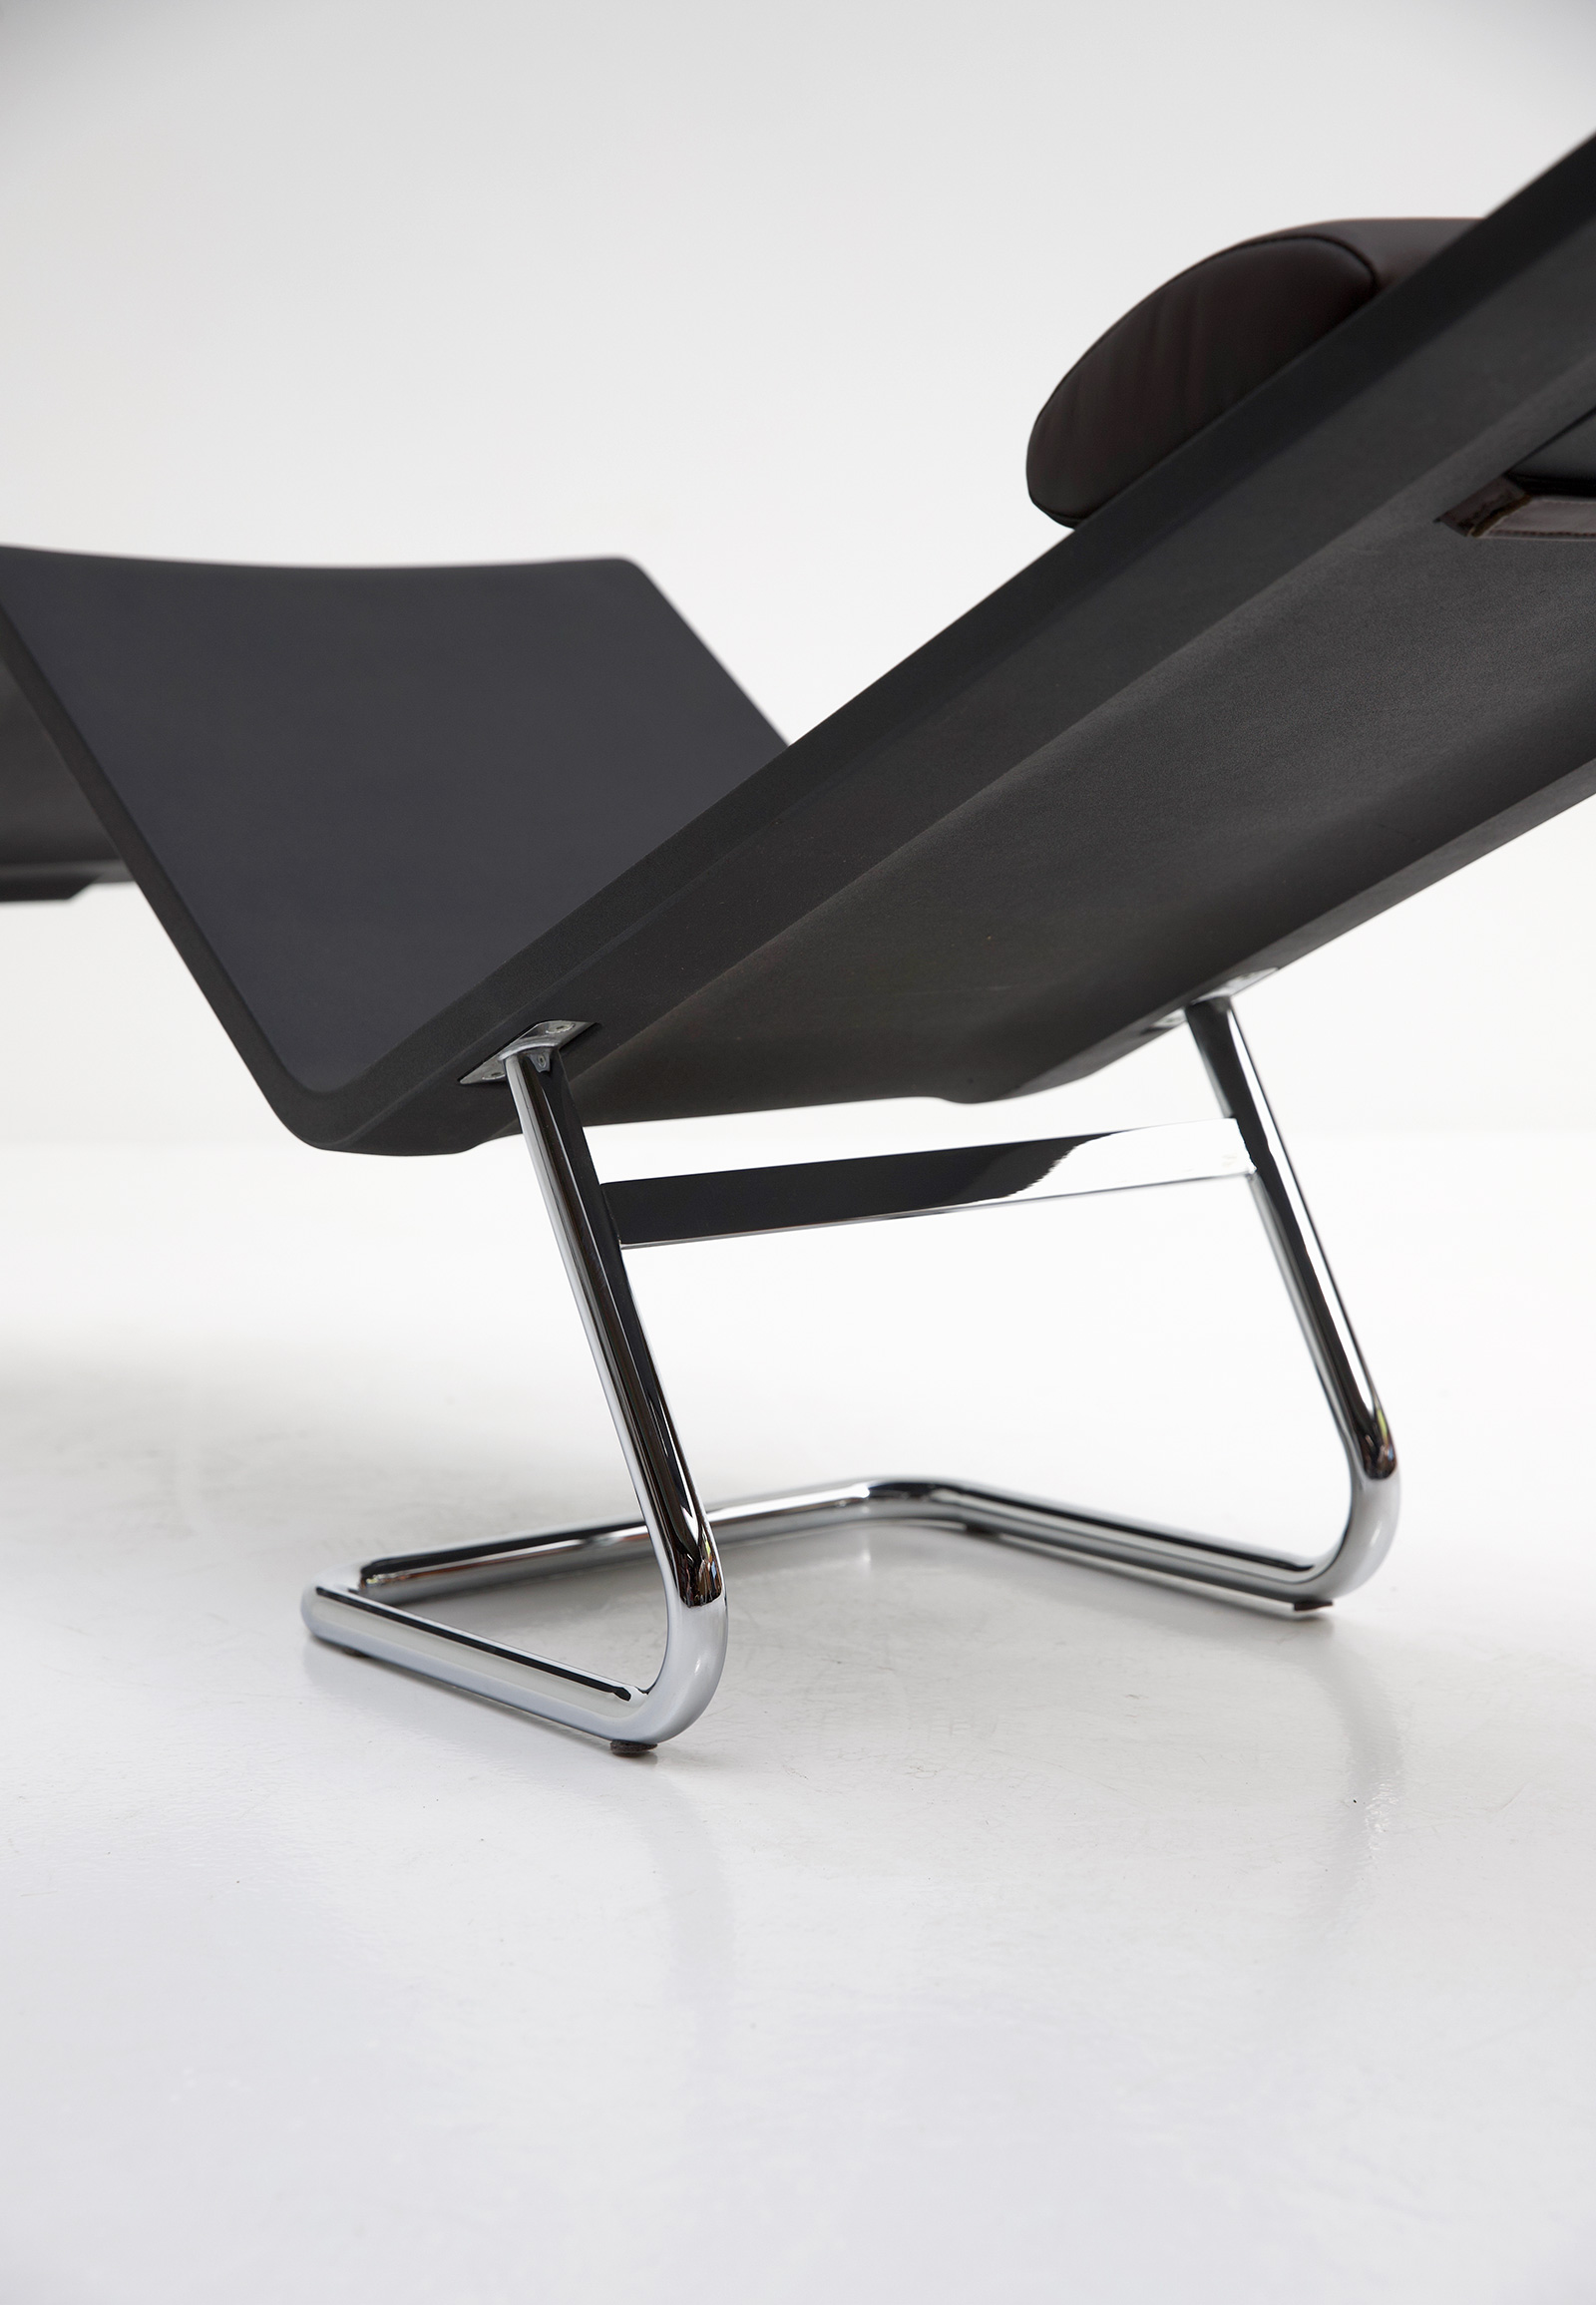 MVS Chaise Longue By Maarten Van Severen For Vitra 2000s |  electricmall.com.ng